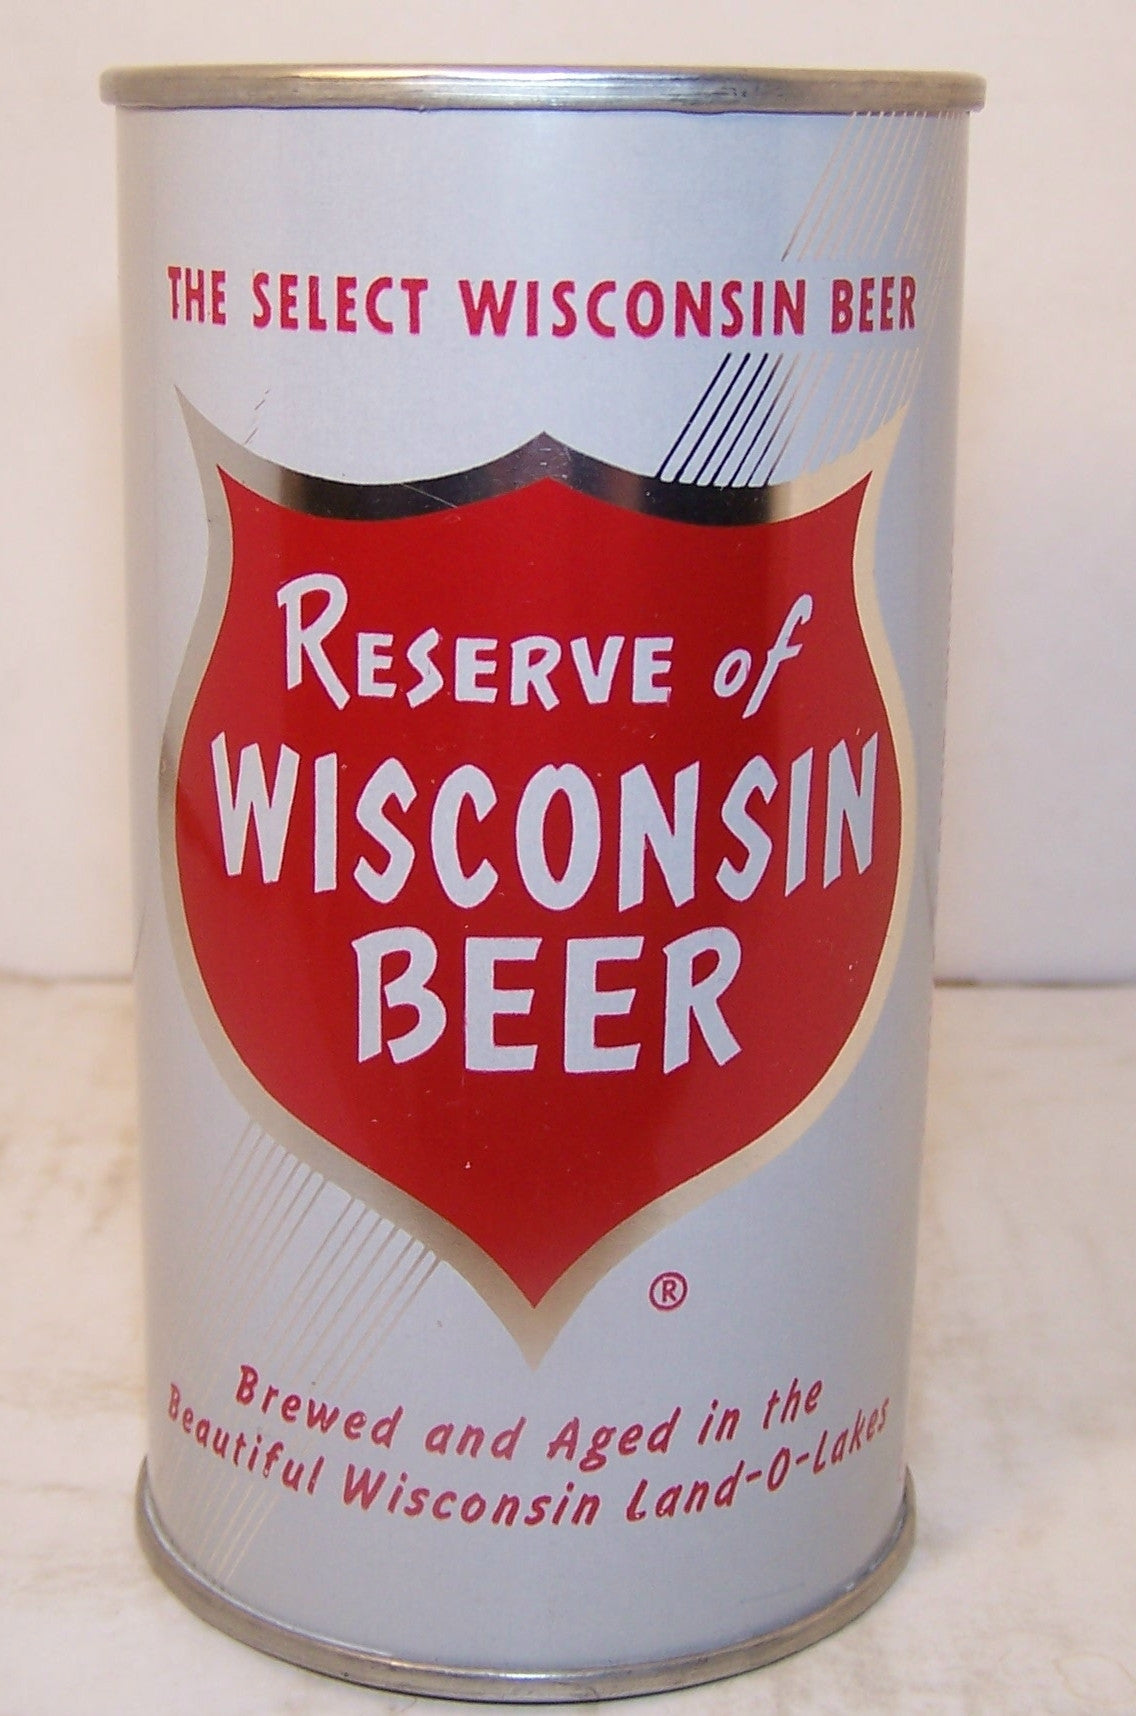 Reserve of Wisconsin Beer, USBC 122-27, Grade A1+ Sold on 07/15/17